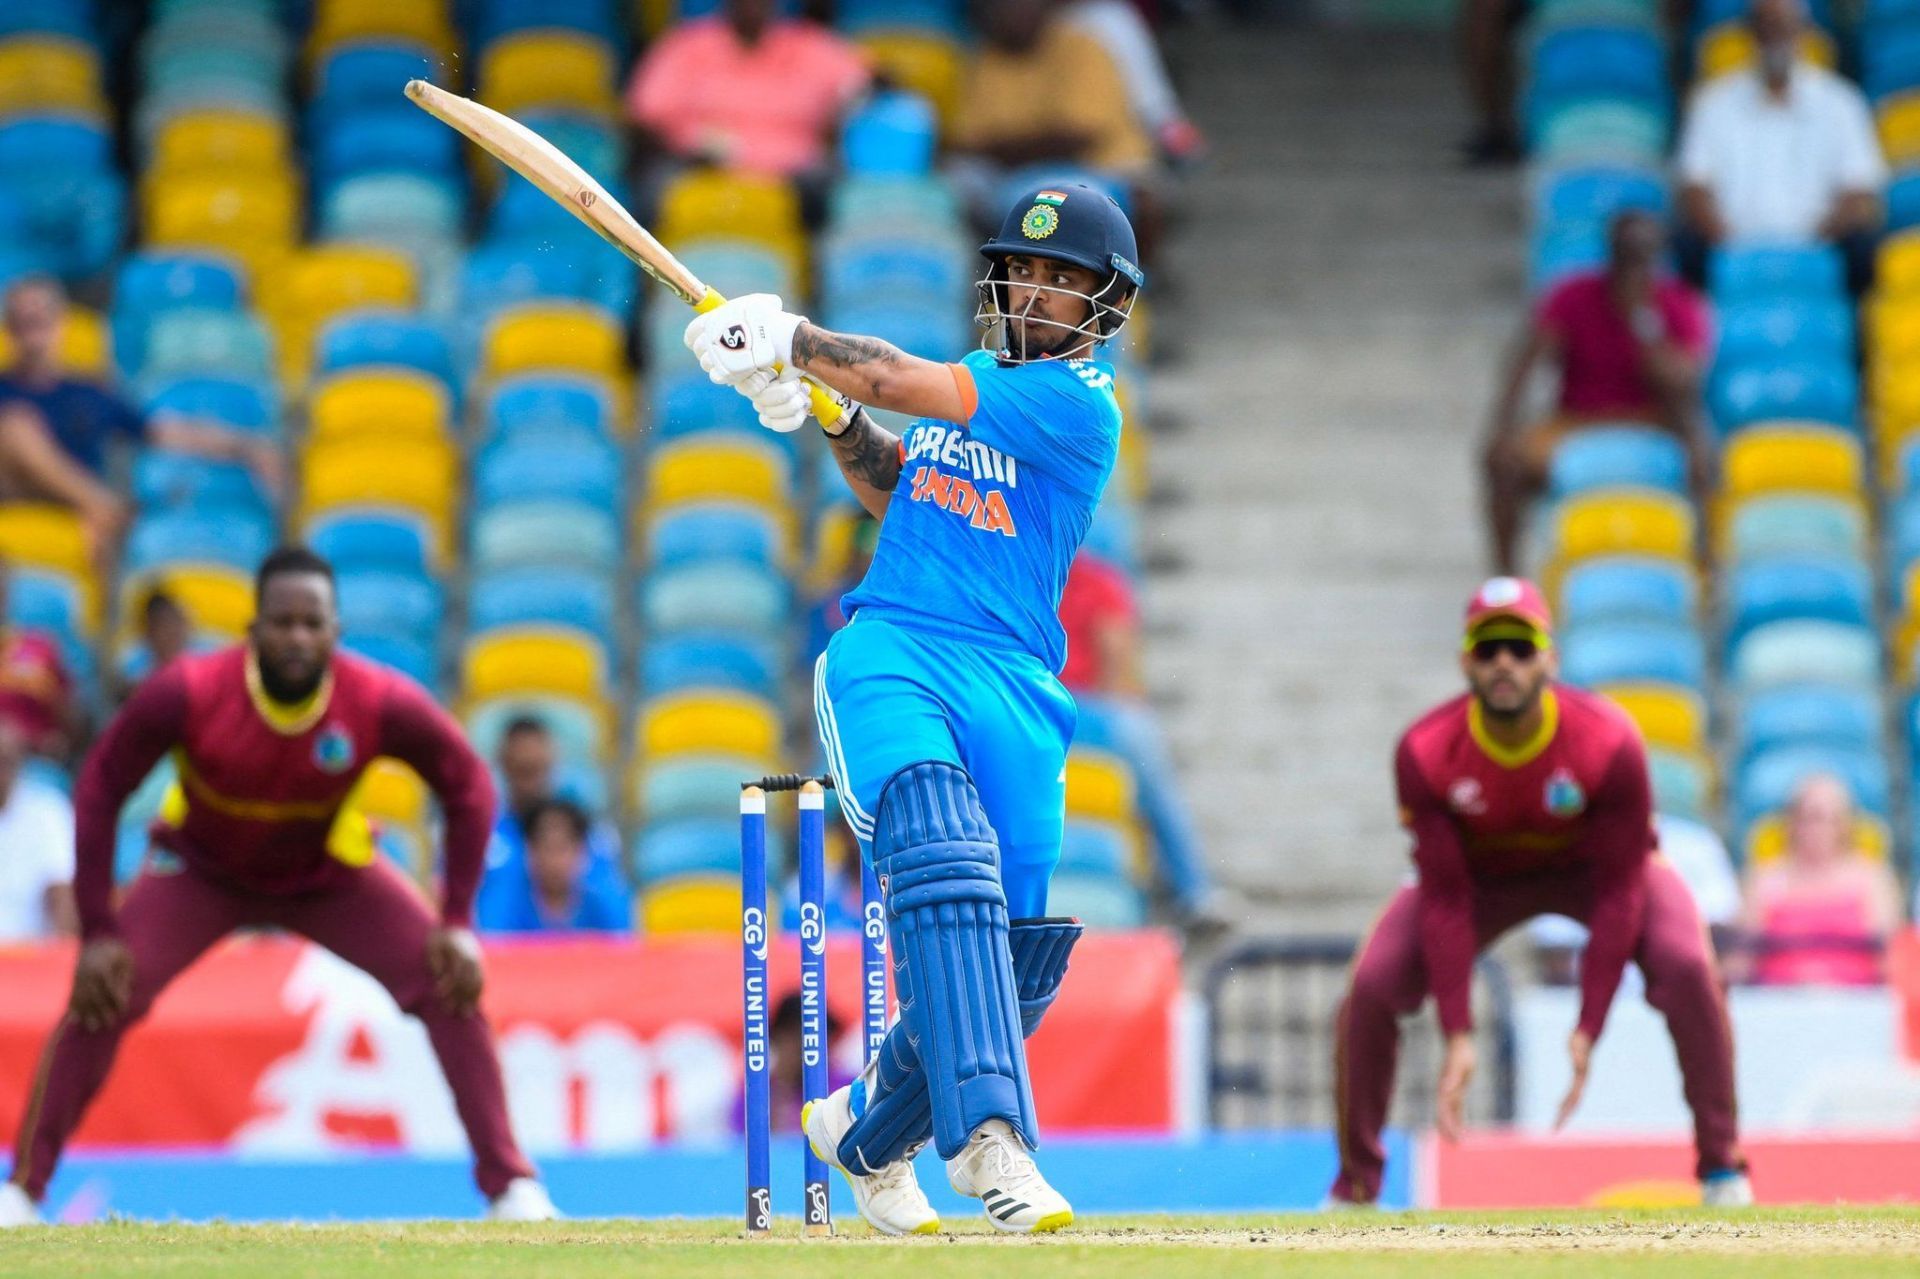 Ishan Kishan opened in all three ODIs against the West Indies. [P/C: Twitter]